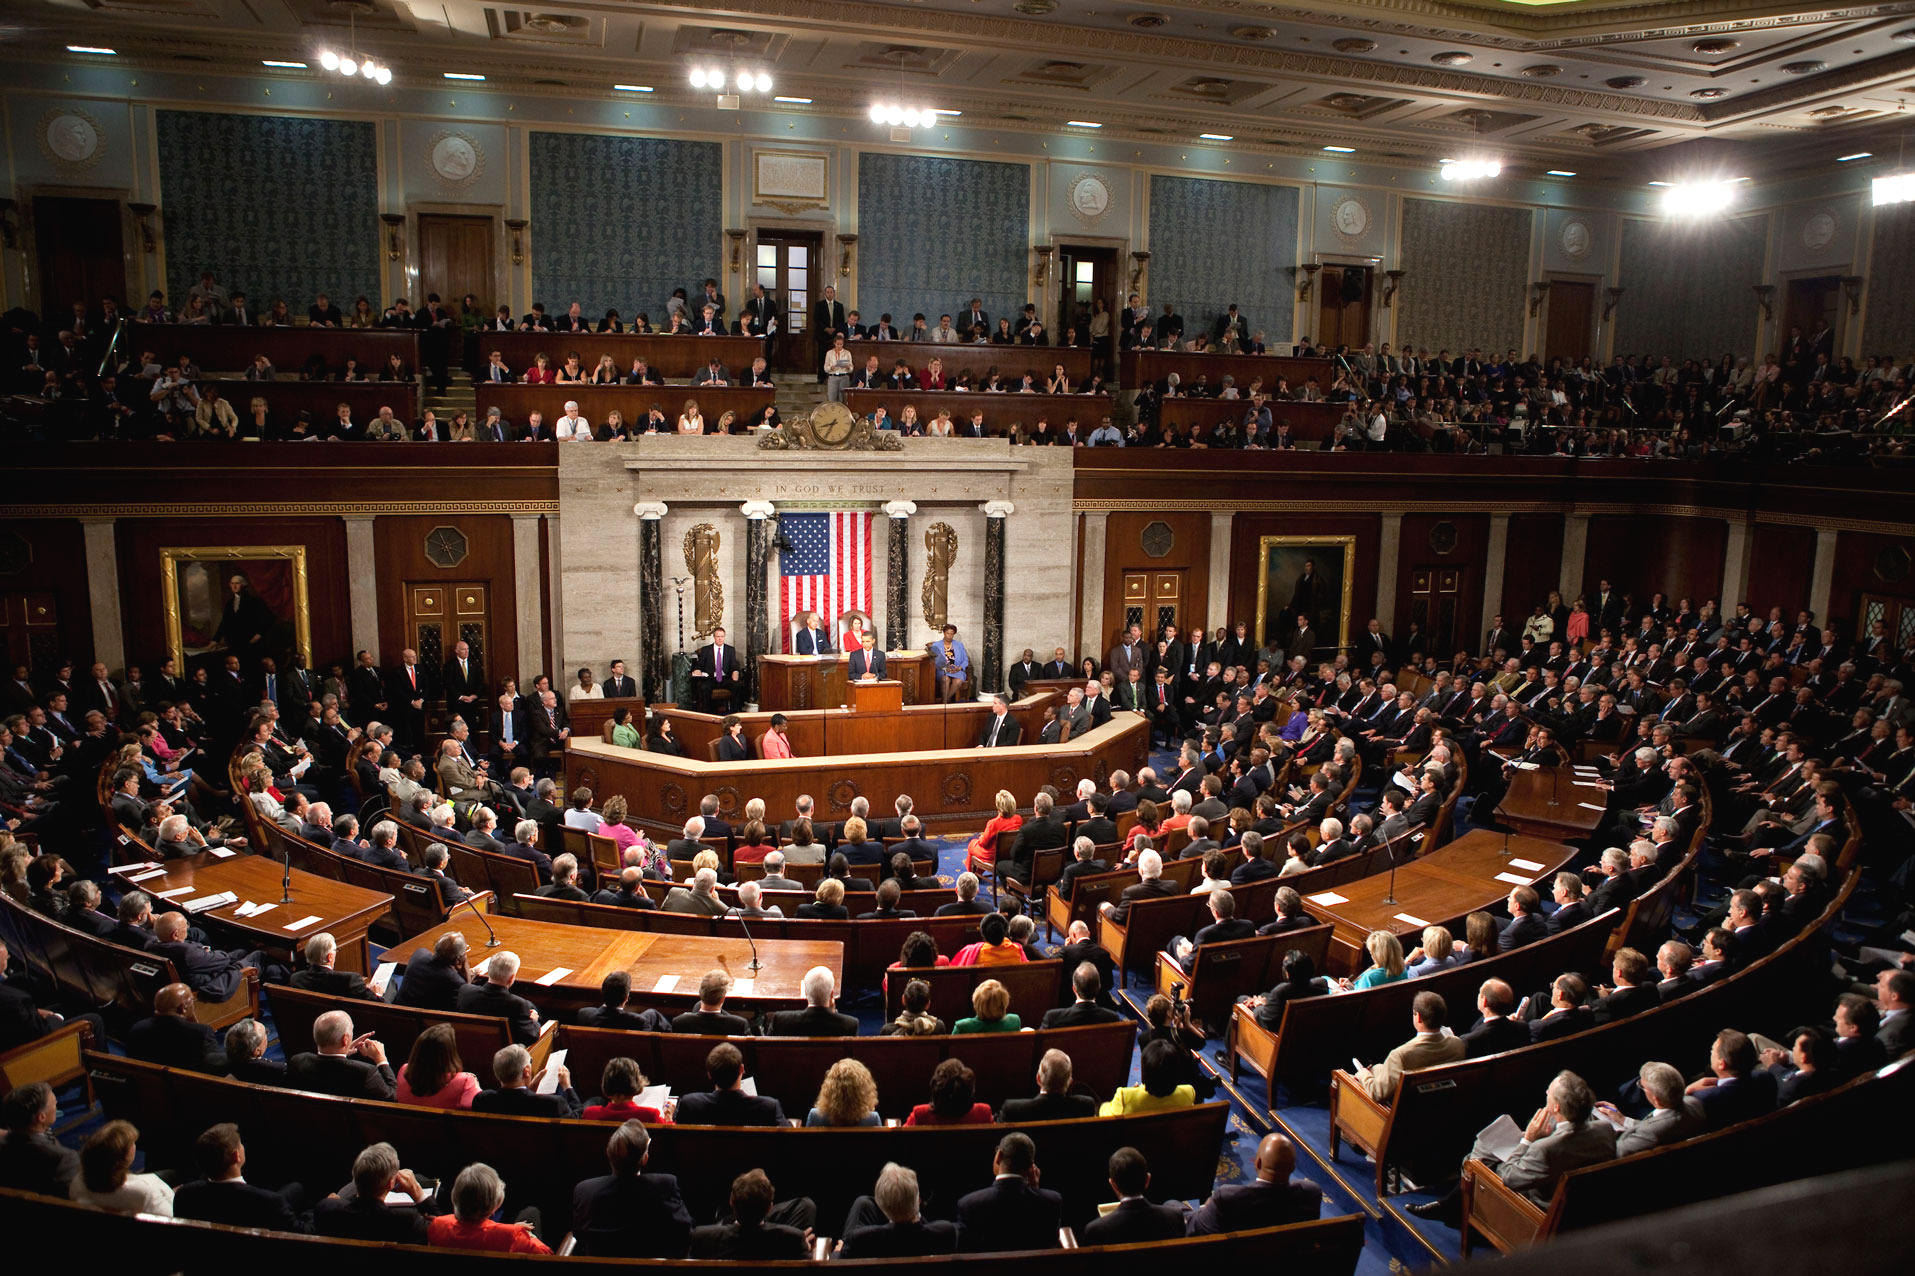 Obama_Health_Care_Speech_to_Joint_Session_of_Congress Wiki Commons.jpg